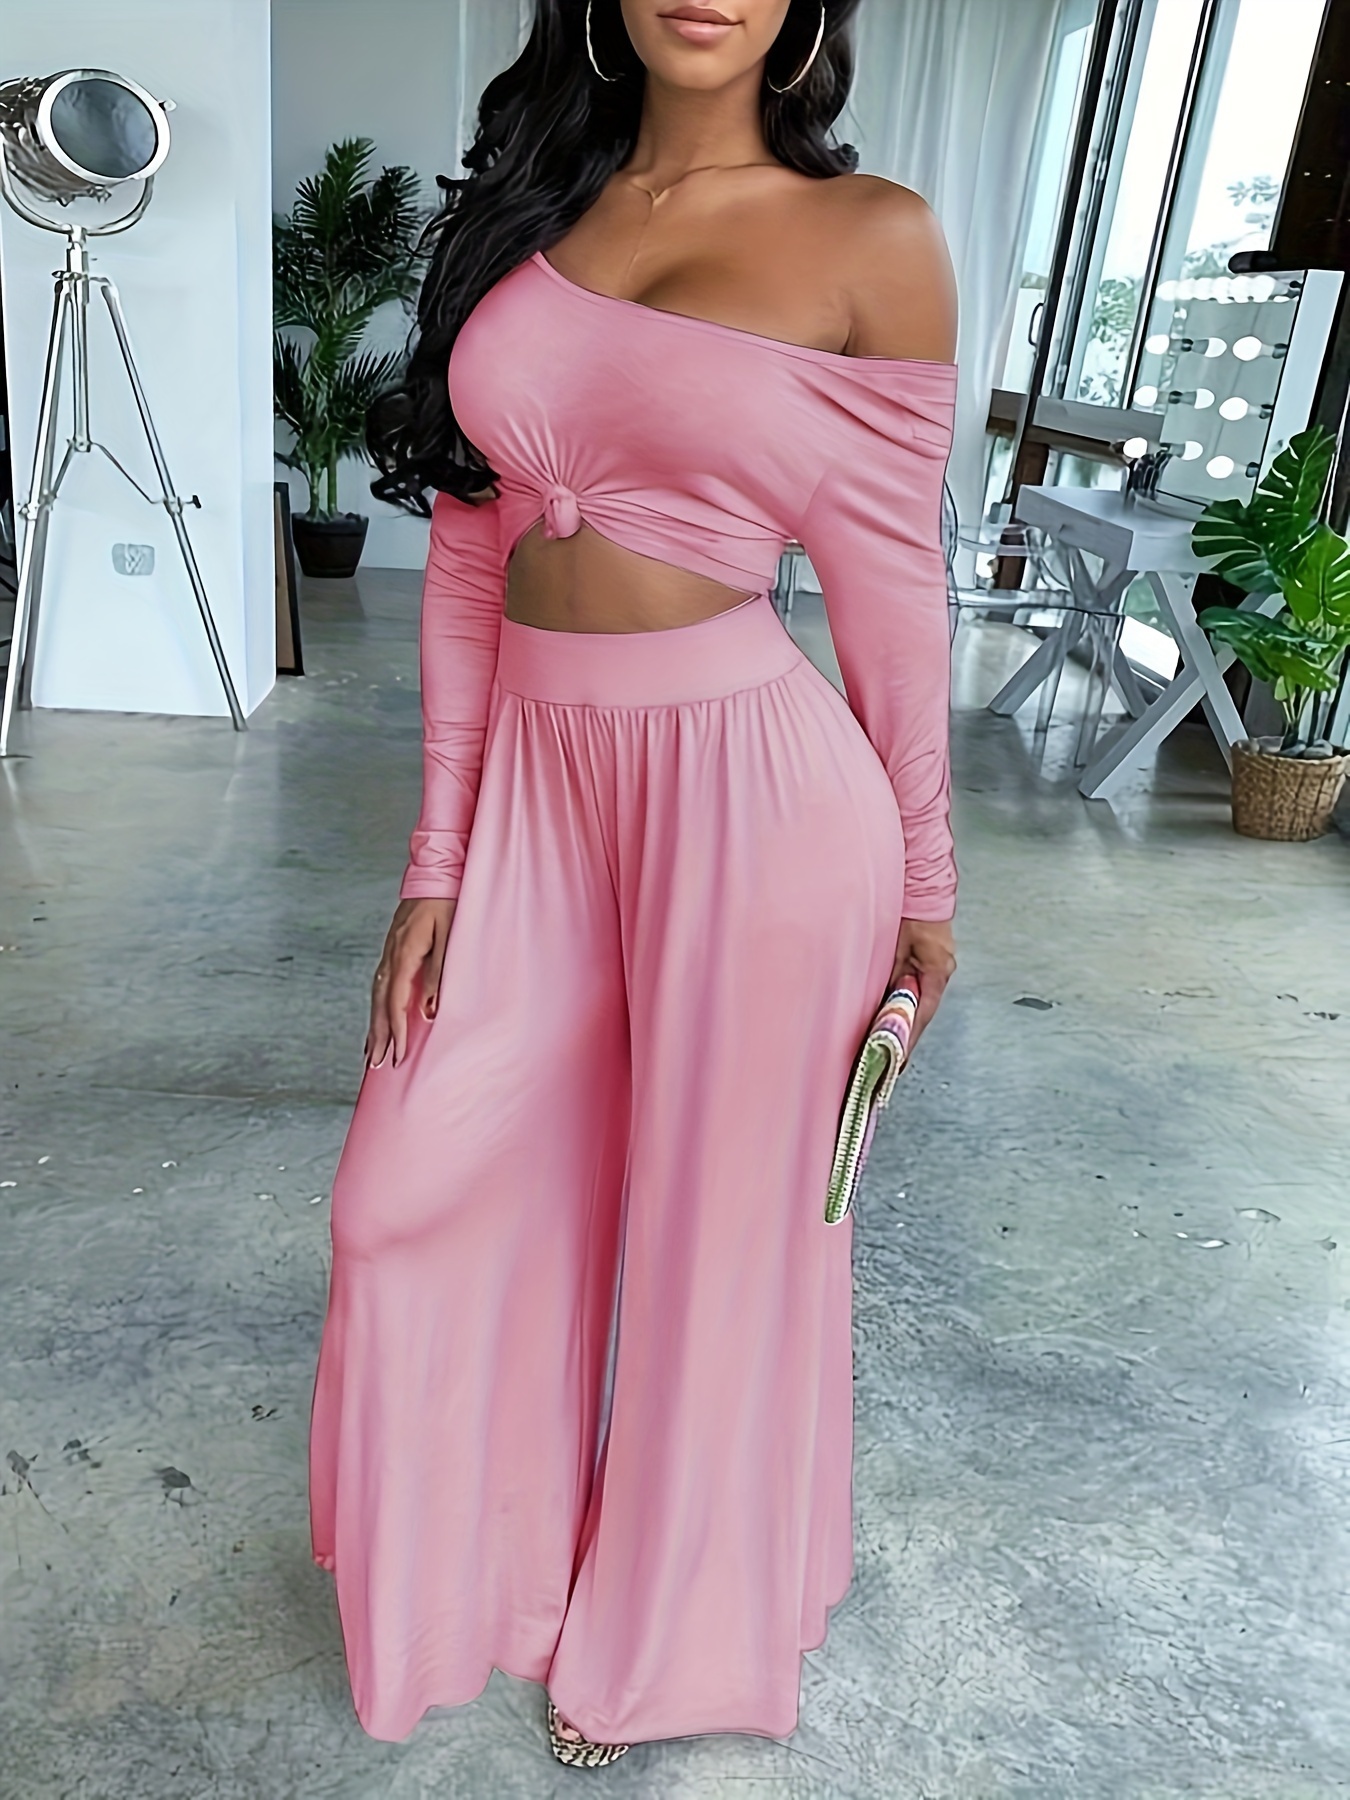 Casual Summer 2 Two Piece Set Women Pink Outfit Long Sleeve Crop